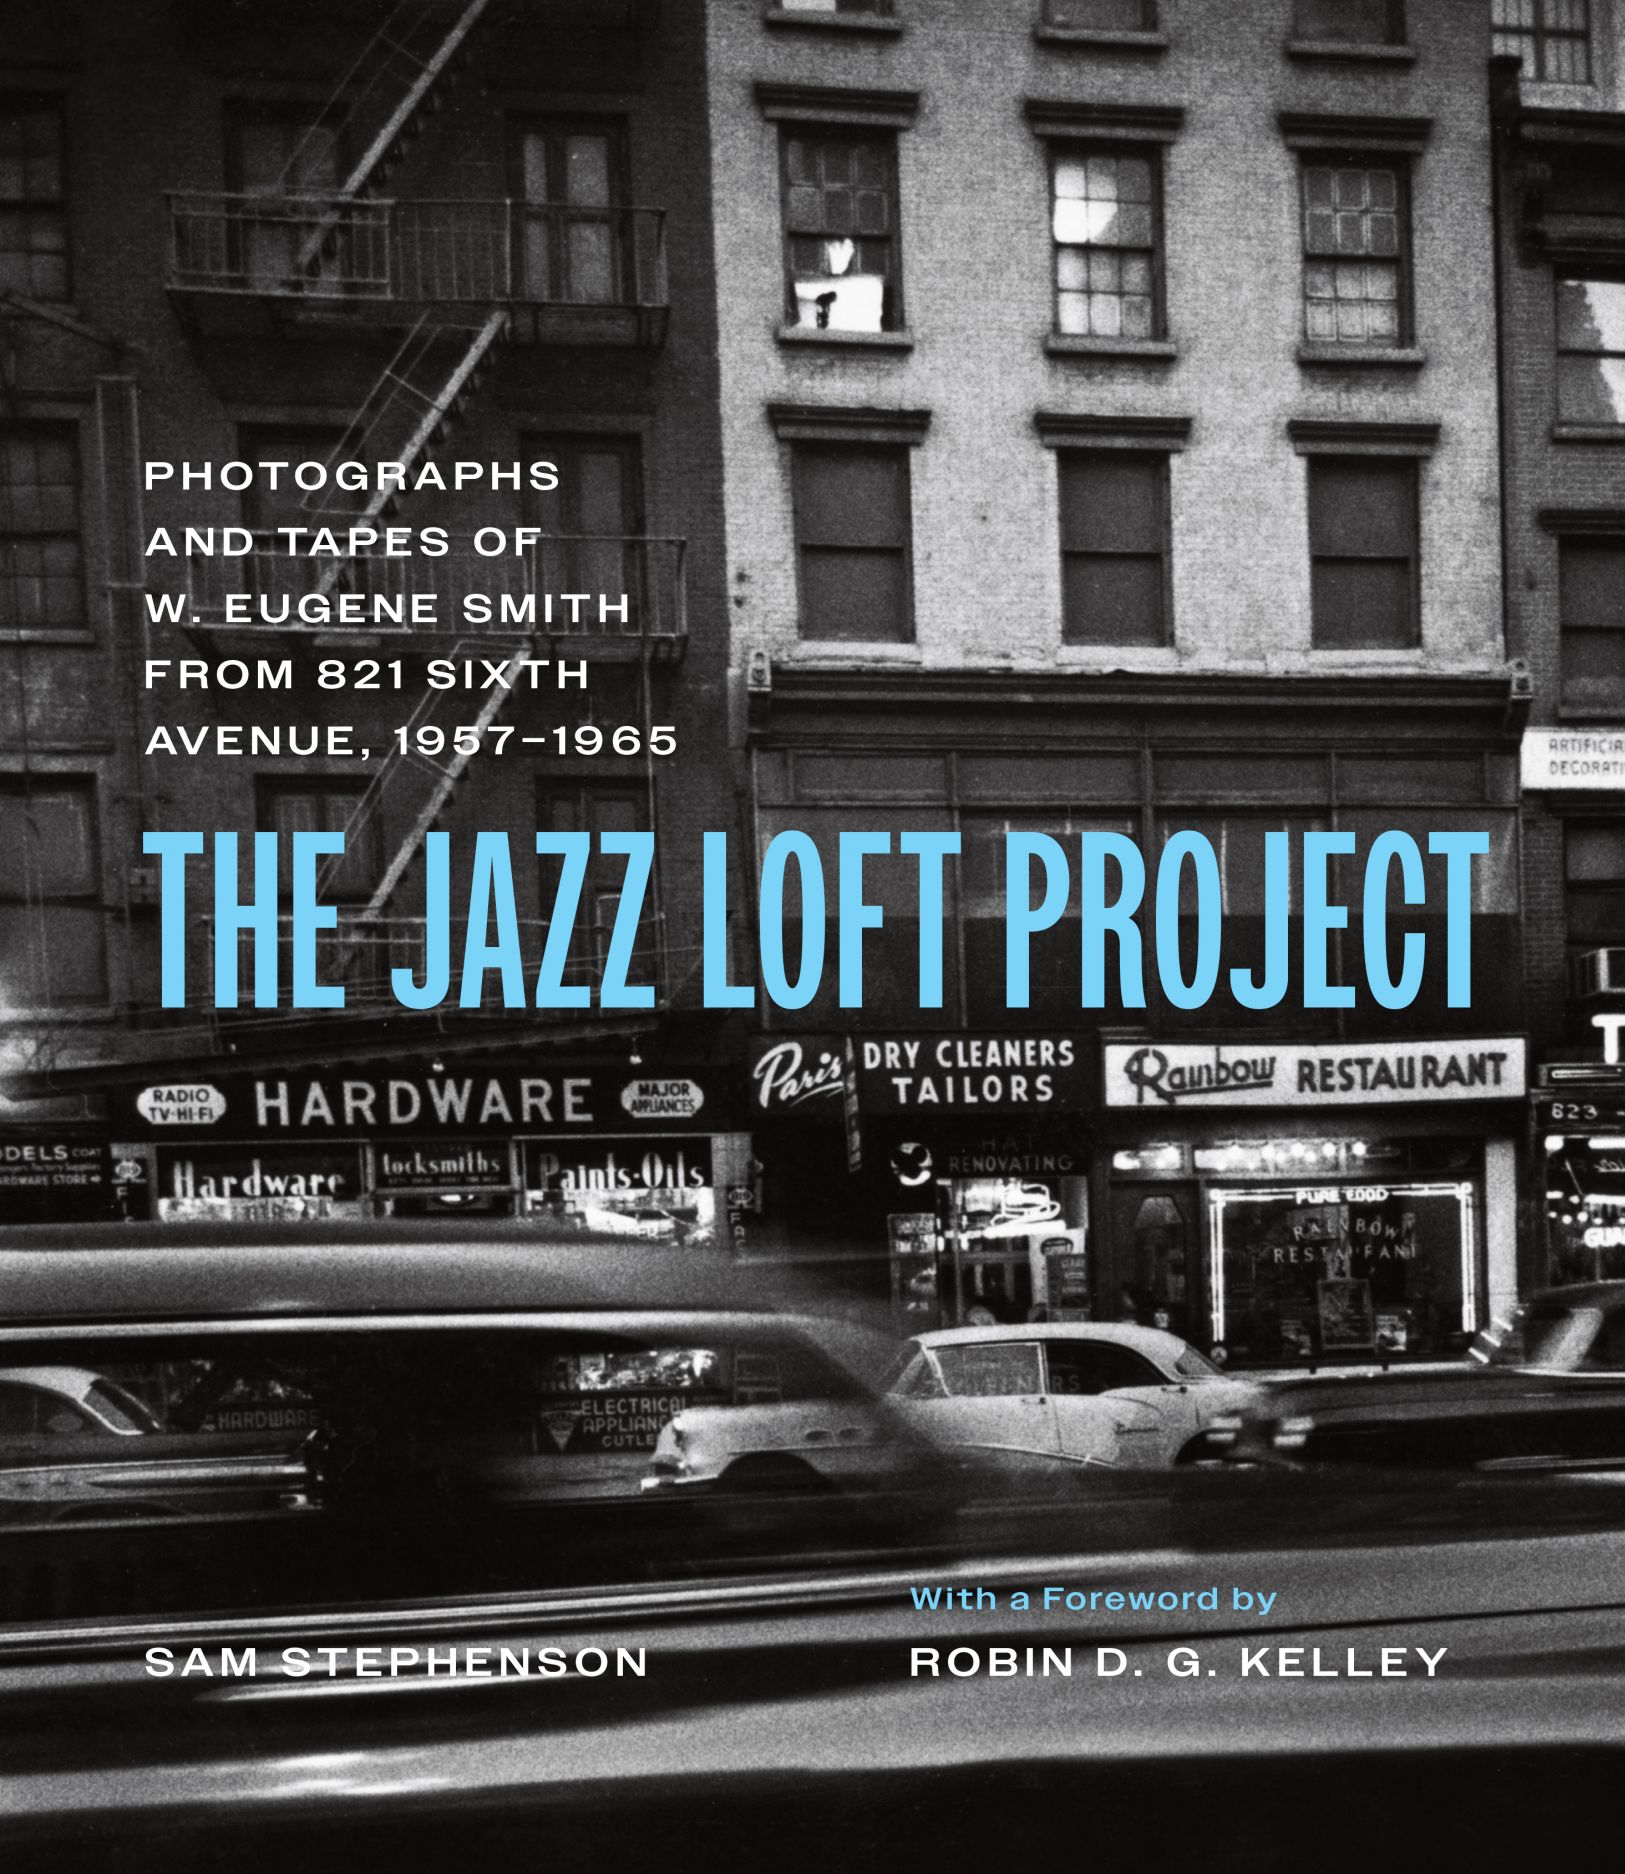 The Jazz Loft Project Photographs and Tapes of W. Eugene Smith from